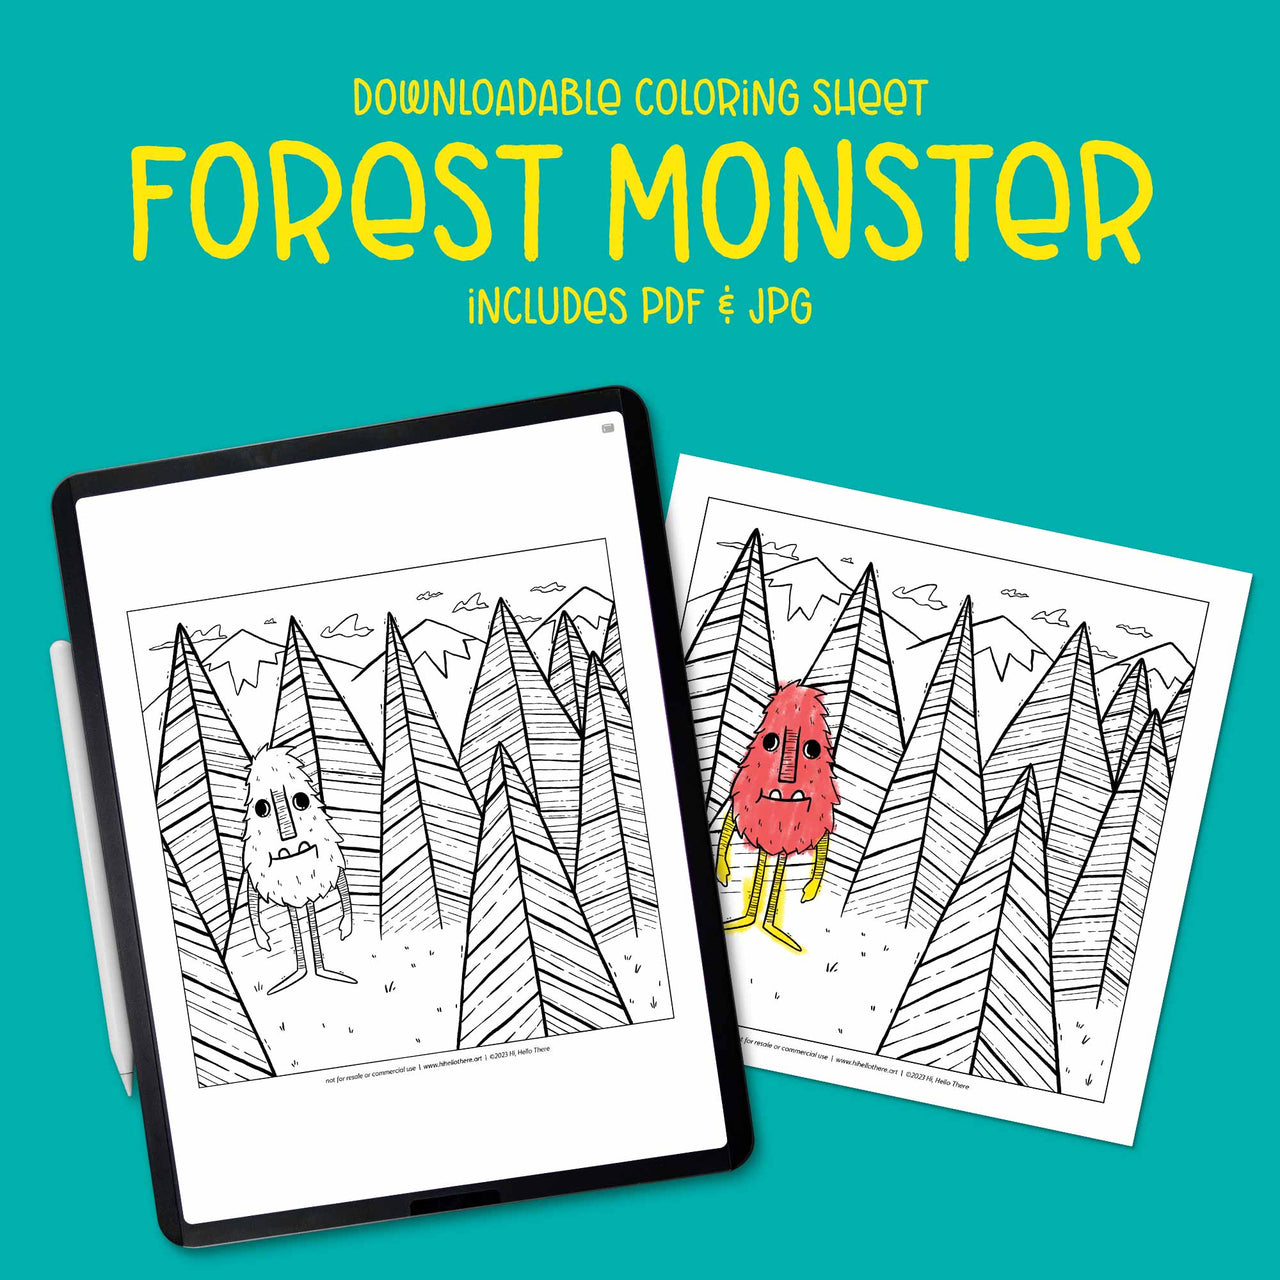 Forest Monster Downloadable Coloring Sheet